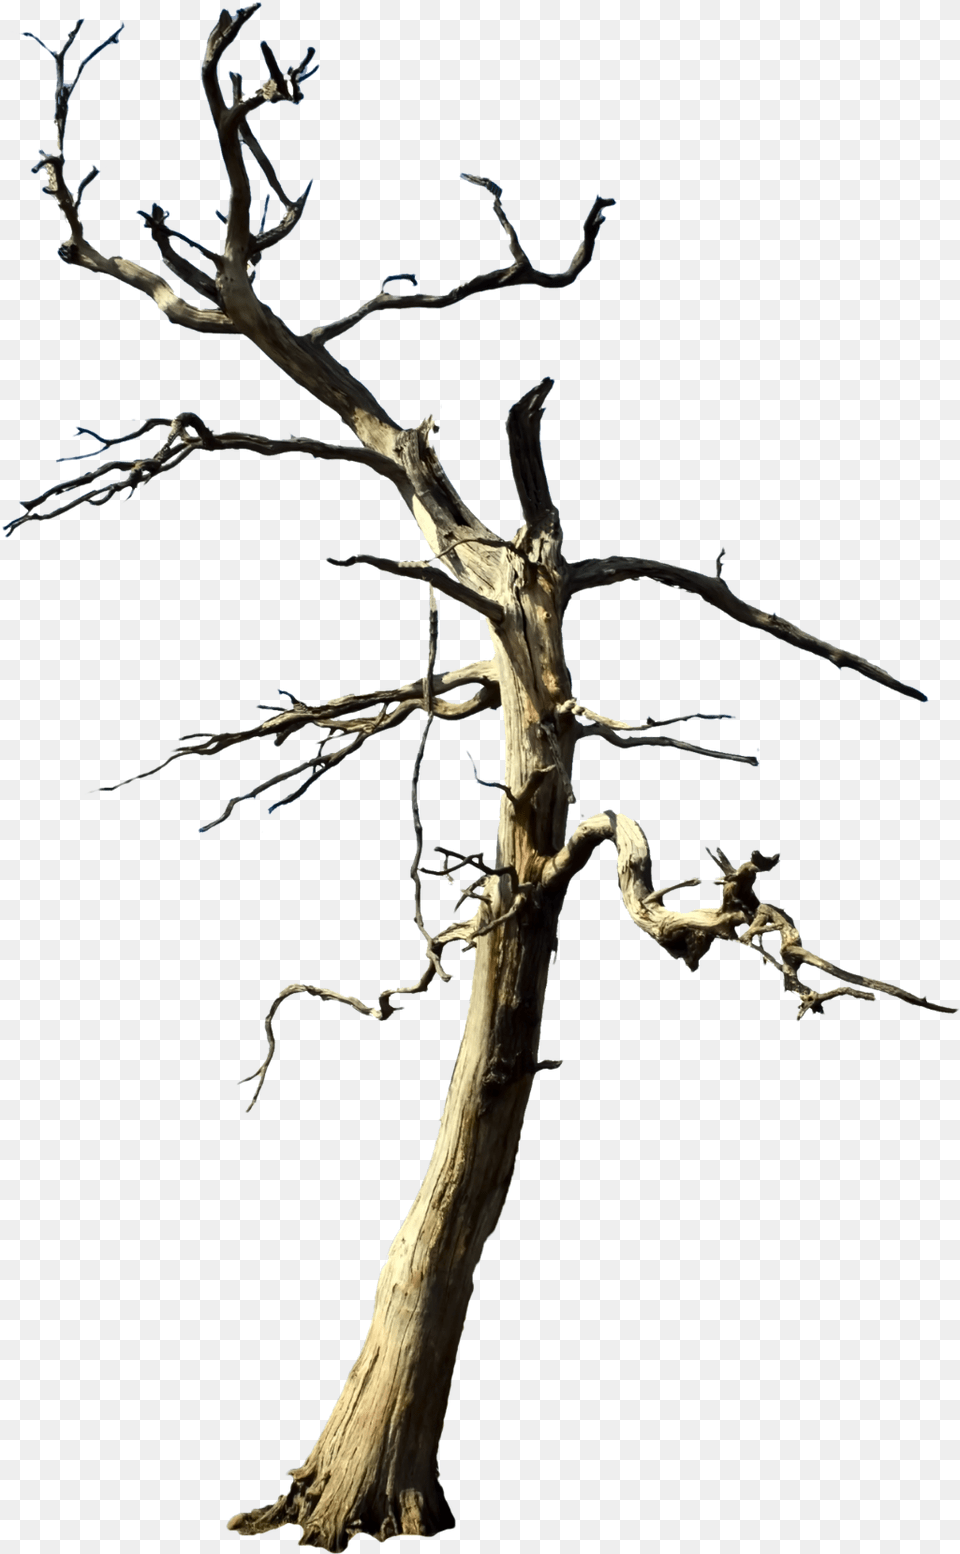 Tree Deadtree Forest Nature Foreground Background Dead Purple Tree No Background, Plant, Wood, Driftwood Free Transparent Png